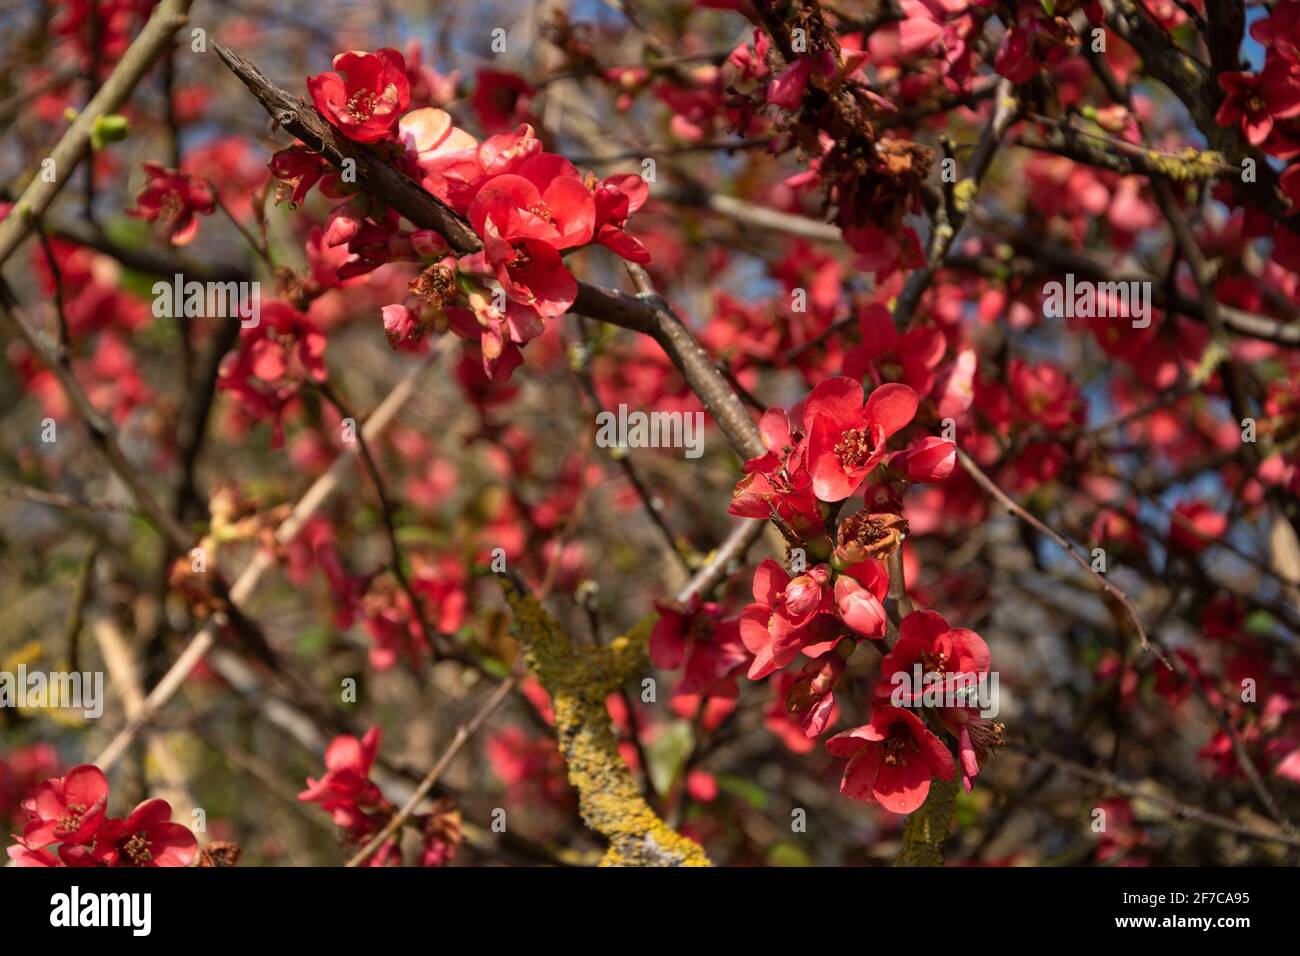 Red color in nature. Japanese quince (Chaenomeles) bush blossoming with red flowers. Spring floral background. Selective focus and blur. Stock Photo